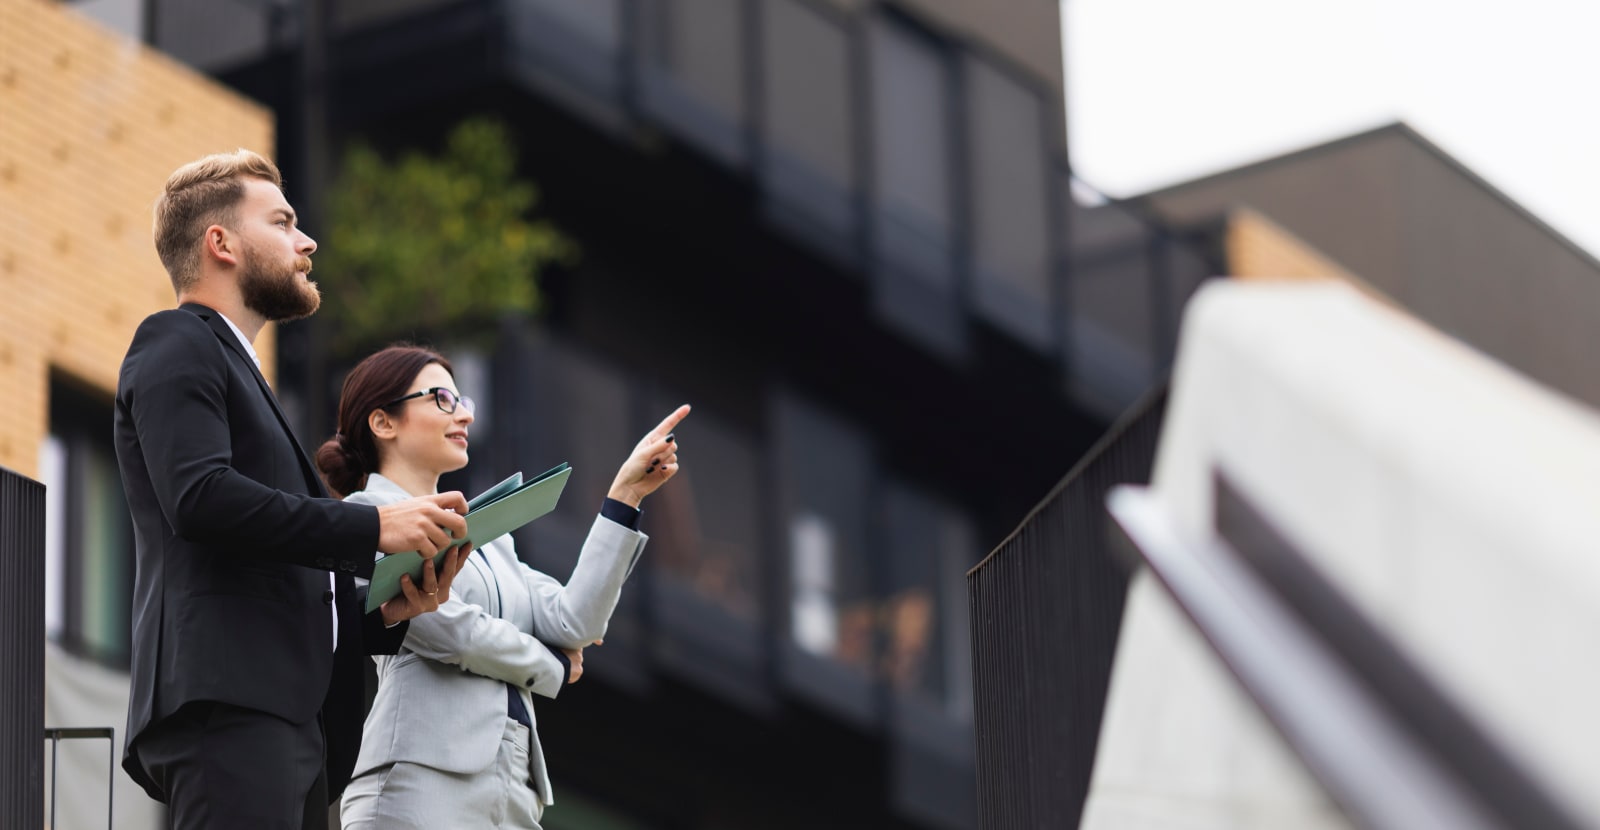 A man and a woman in business outfits are standing outside a building. The woman is pointing to something.